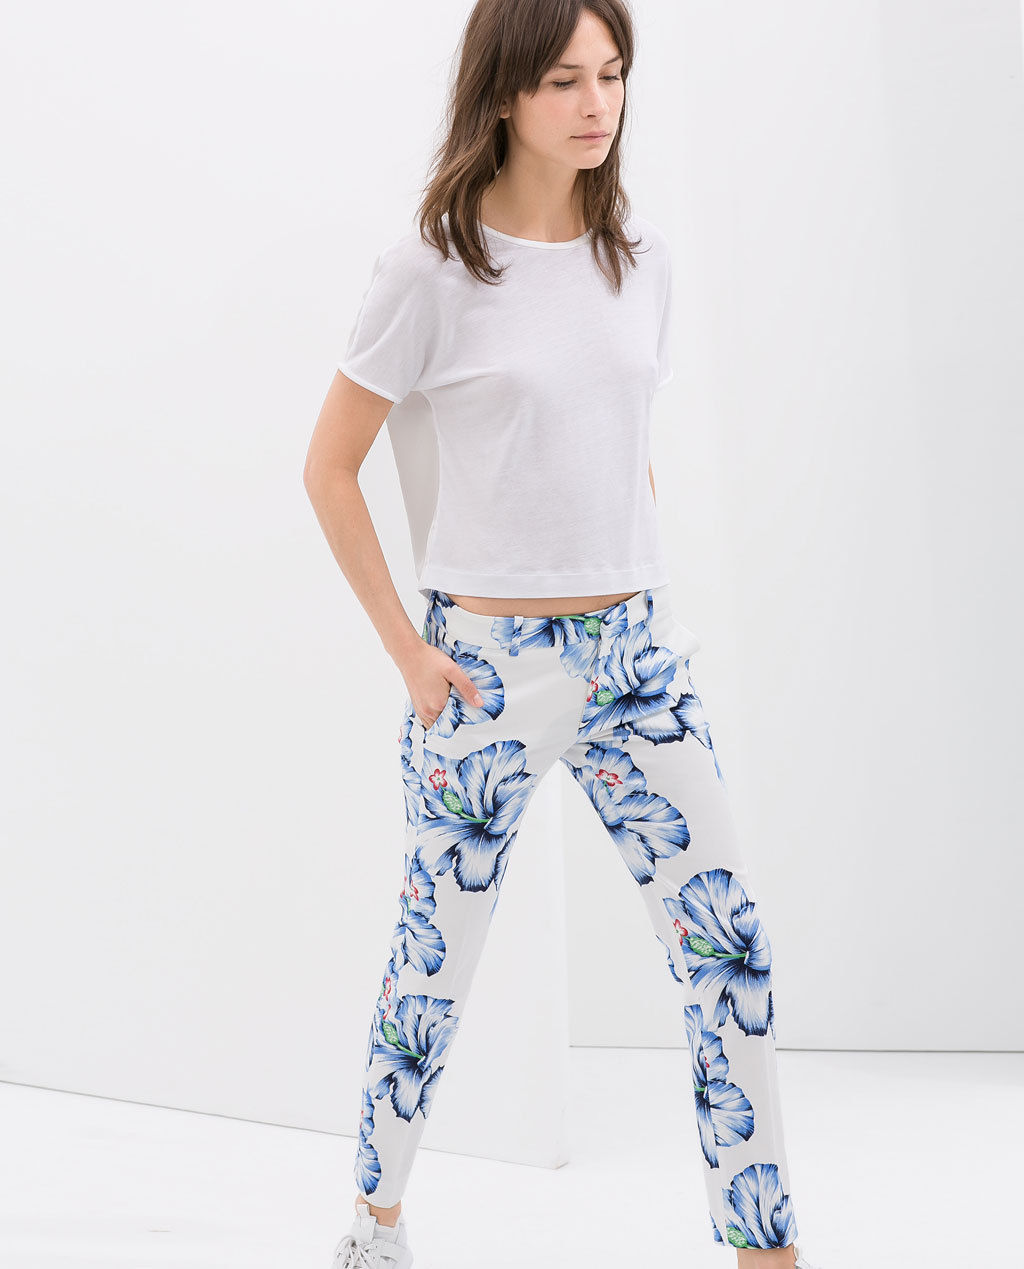 My Shopping Bag: Floral Trousers and Printed Tees - FASHION AND FRAPPES %